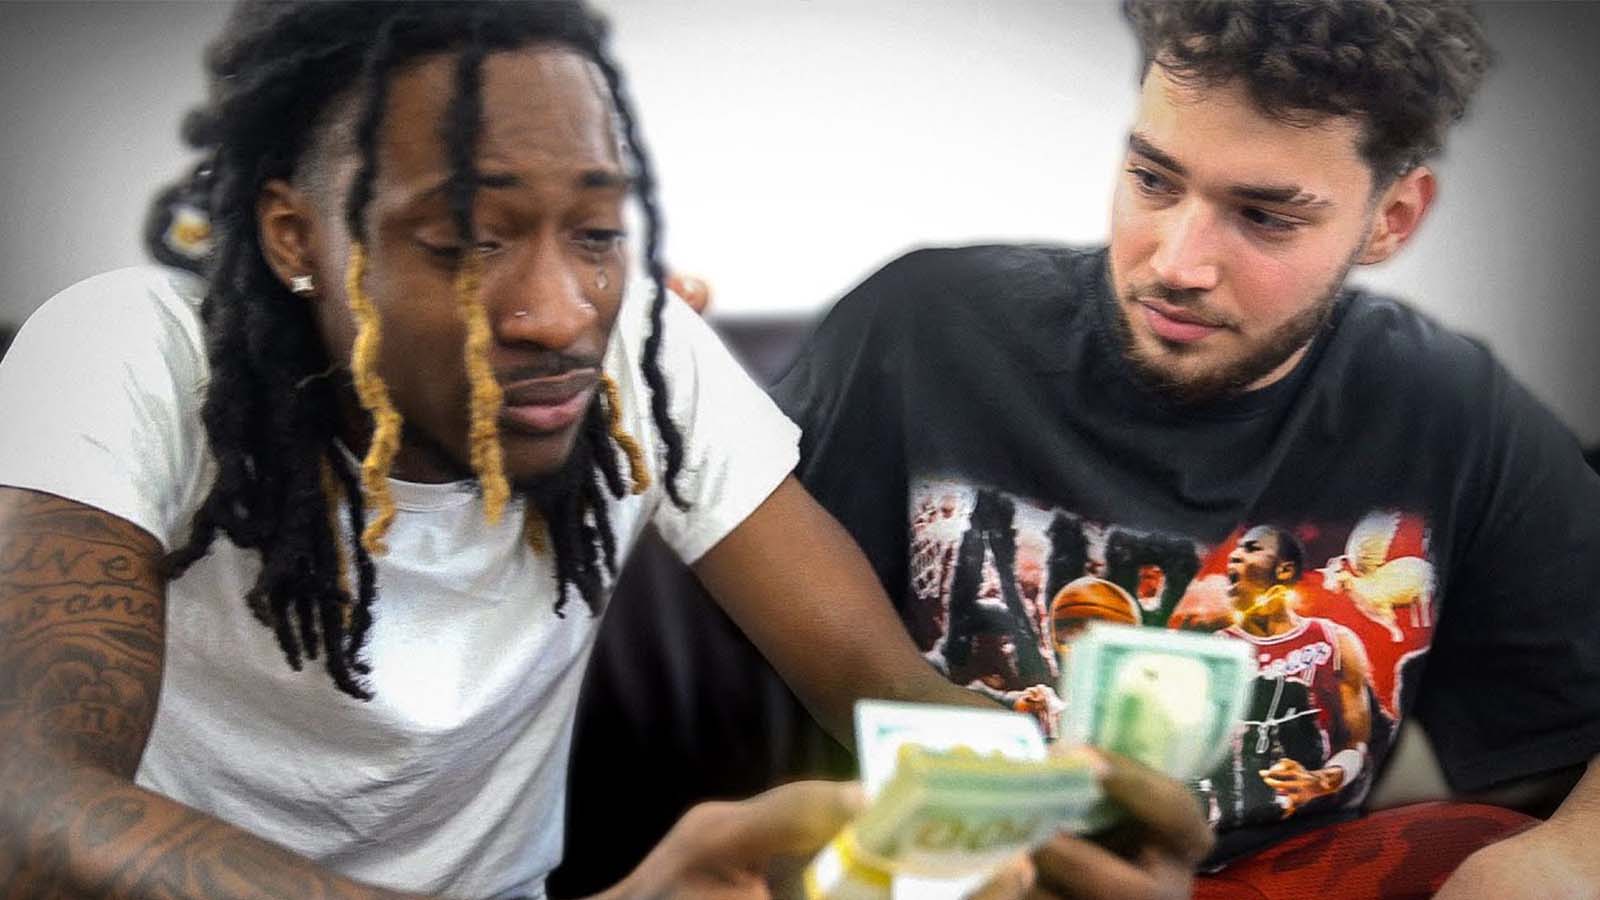 Adin Ross surprises Twitch friend who was shot with rent-free house for a year